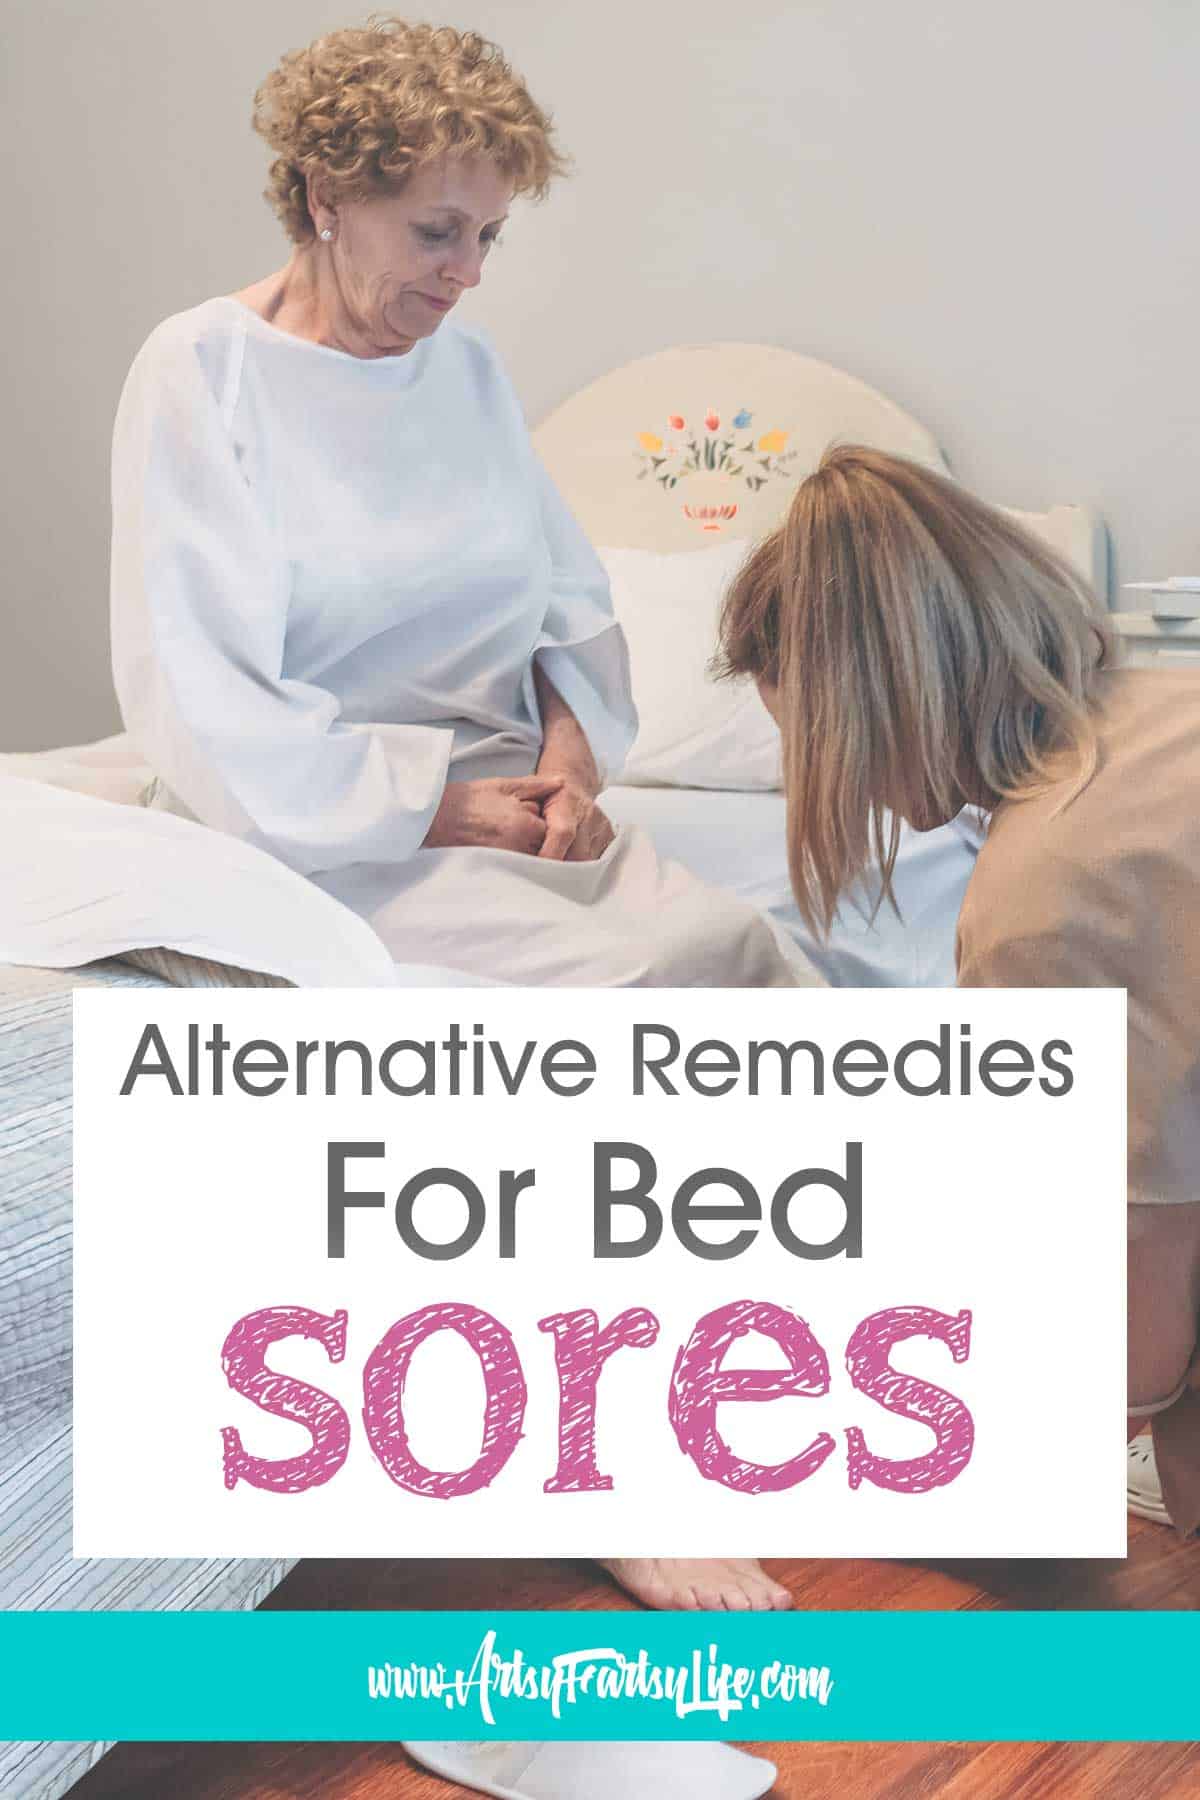 Bed Sores Treatment Cream ? Natural Healing of Bed Sores Pressure Sores  Ulcers